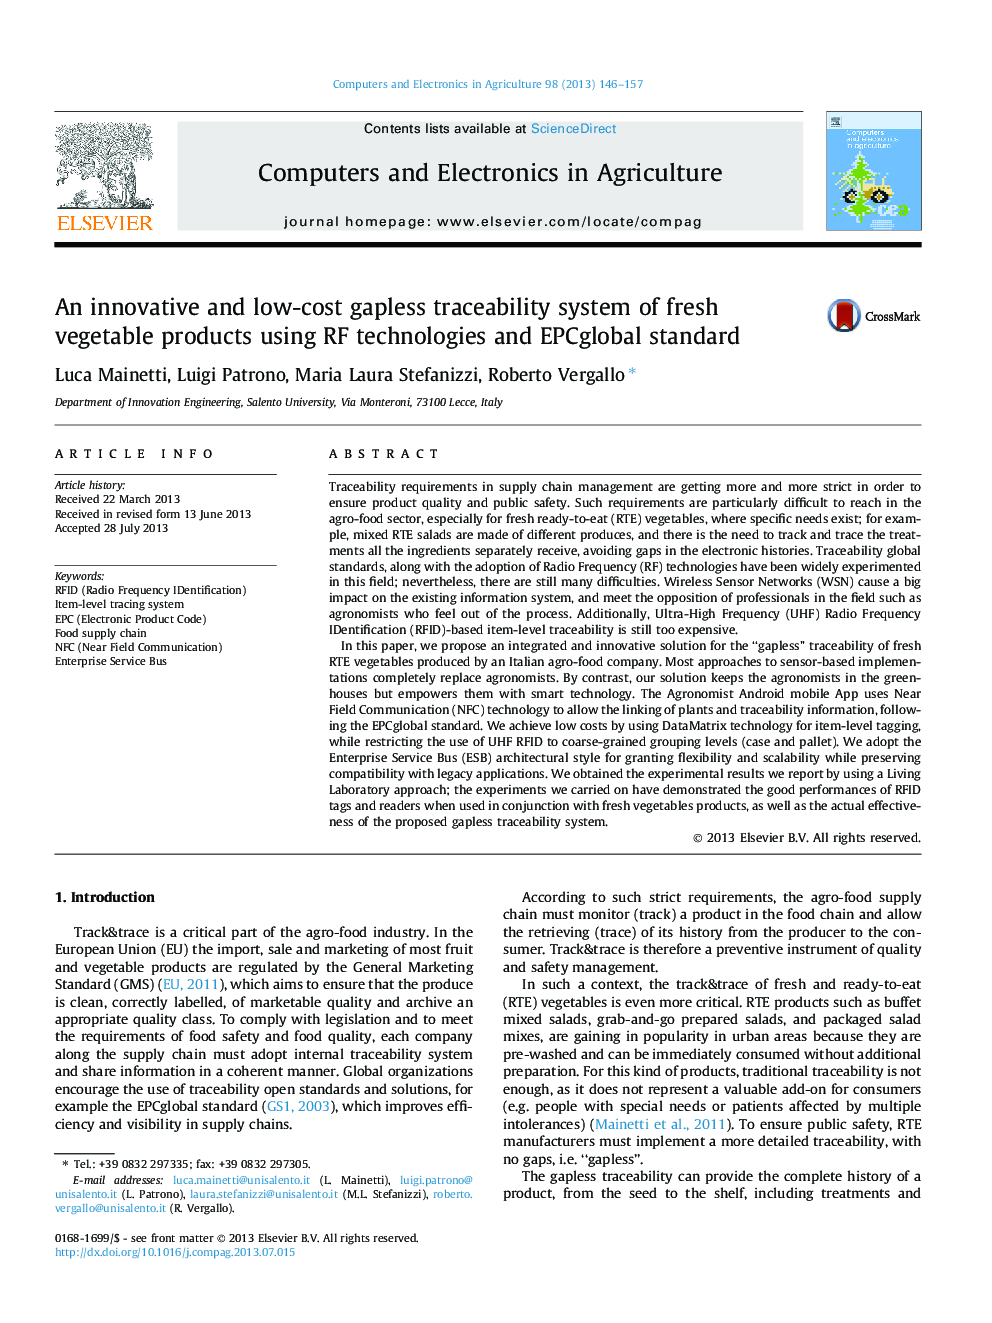 An innovative and low-cost gapless traceability system of fresh vegetable products using RF technologies and EPCglobal standard